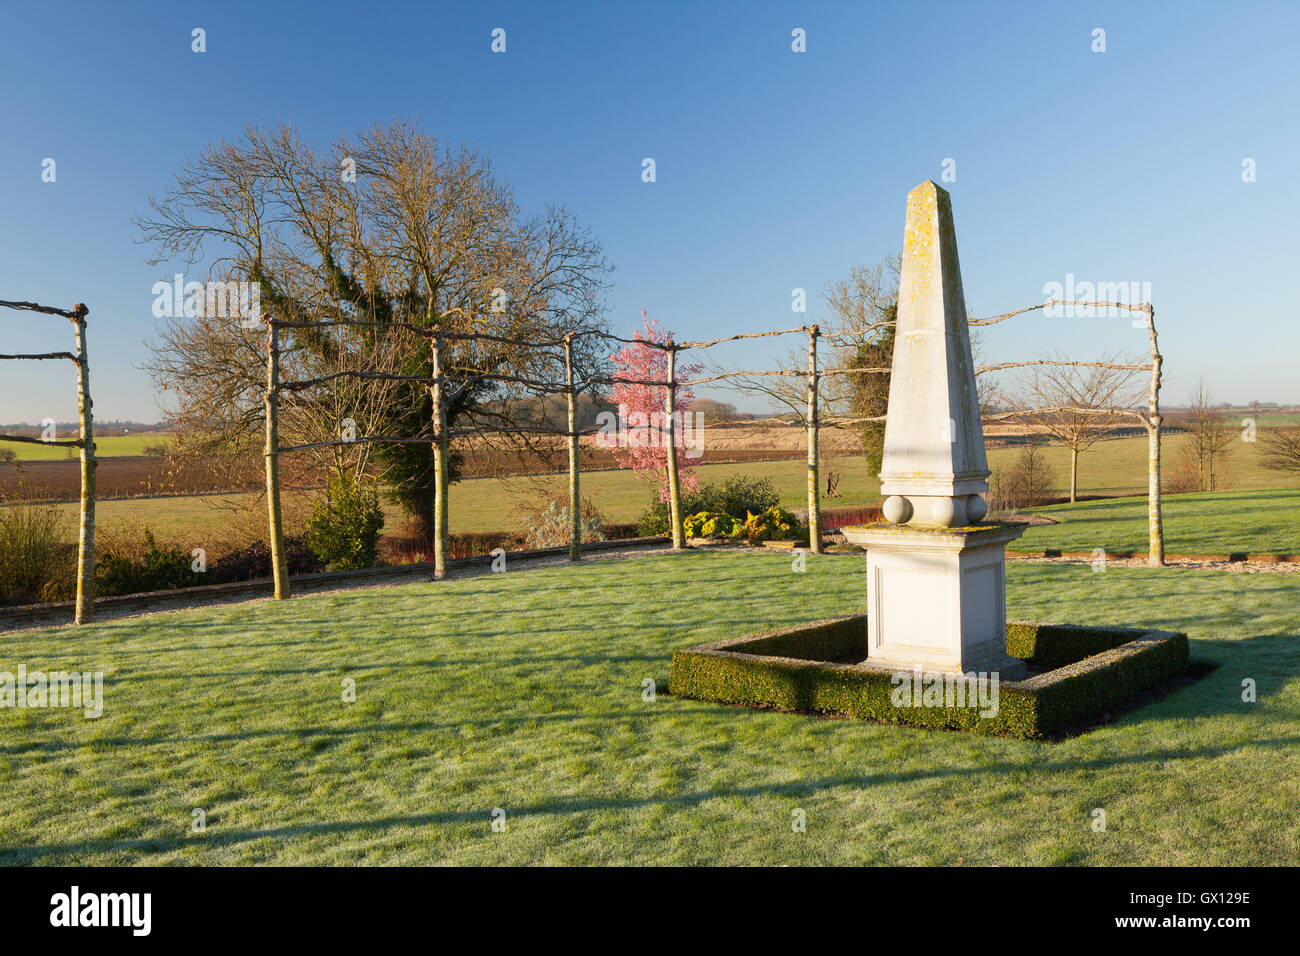 Obelisk lawn. Brightwater Gardens, Saxby, Lincolnshire, UK. Winter, February 2016. Stock Photo